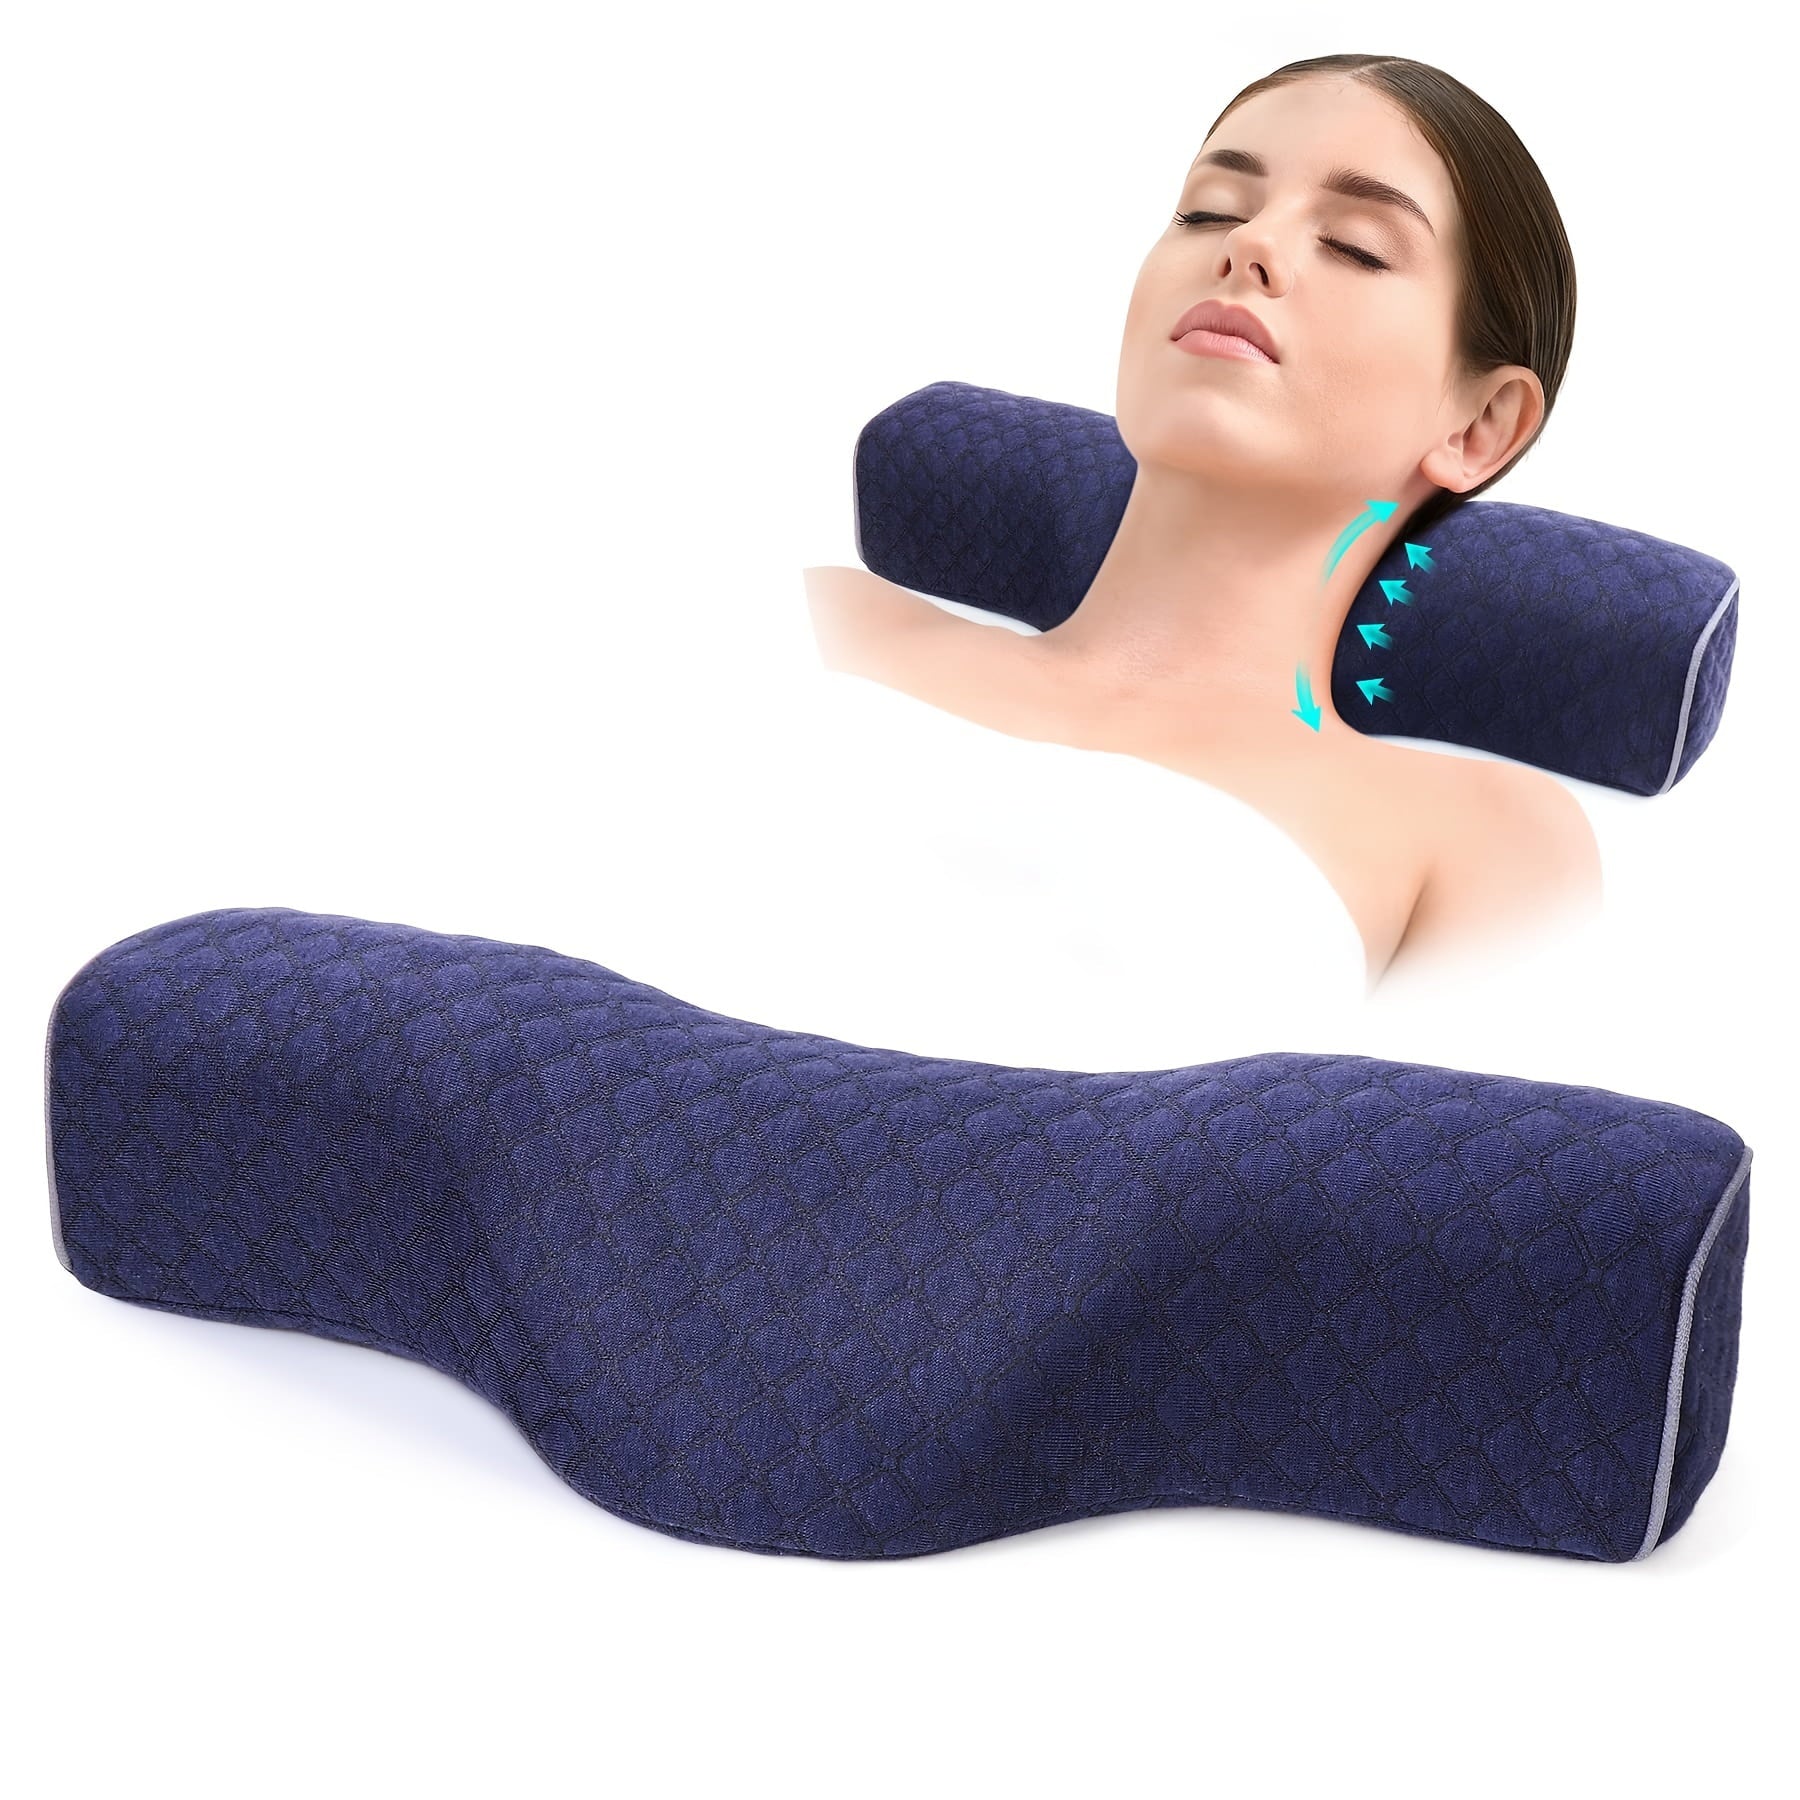 1pc Cervical Neck Pillow For Sleeping, Memory Foam Pillow Neck Bolster Pillow For Stiff Neck Pain Relief, Neck Support Pillow Cervical Pillows For Pain Relief Sleeping Bed Pillow